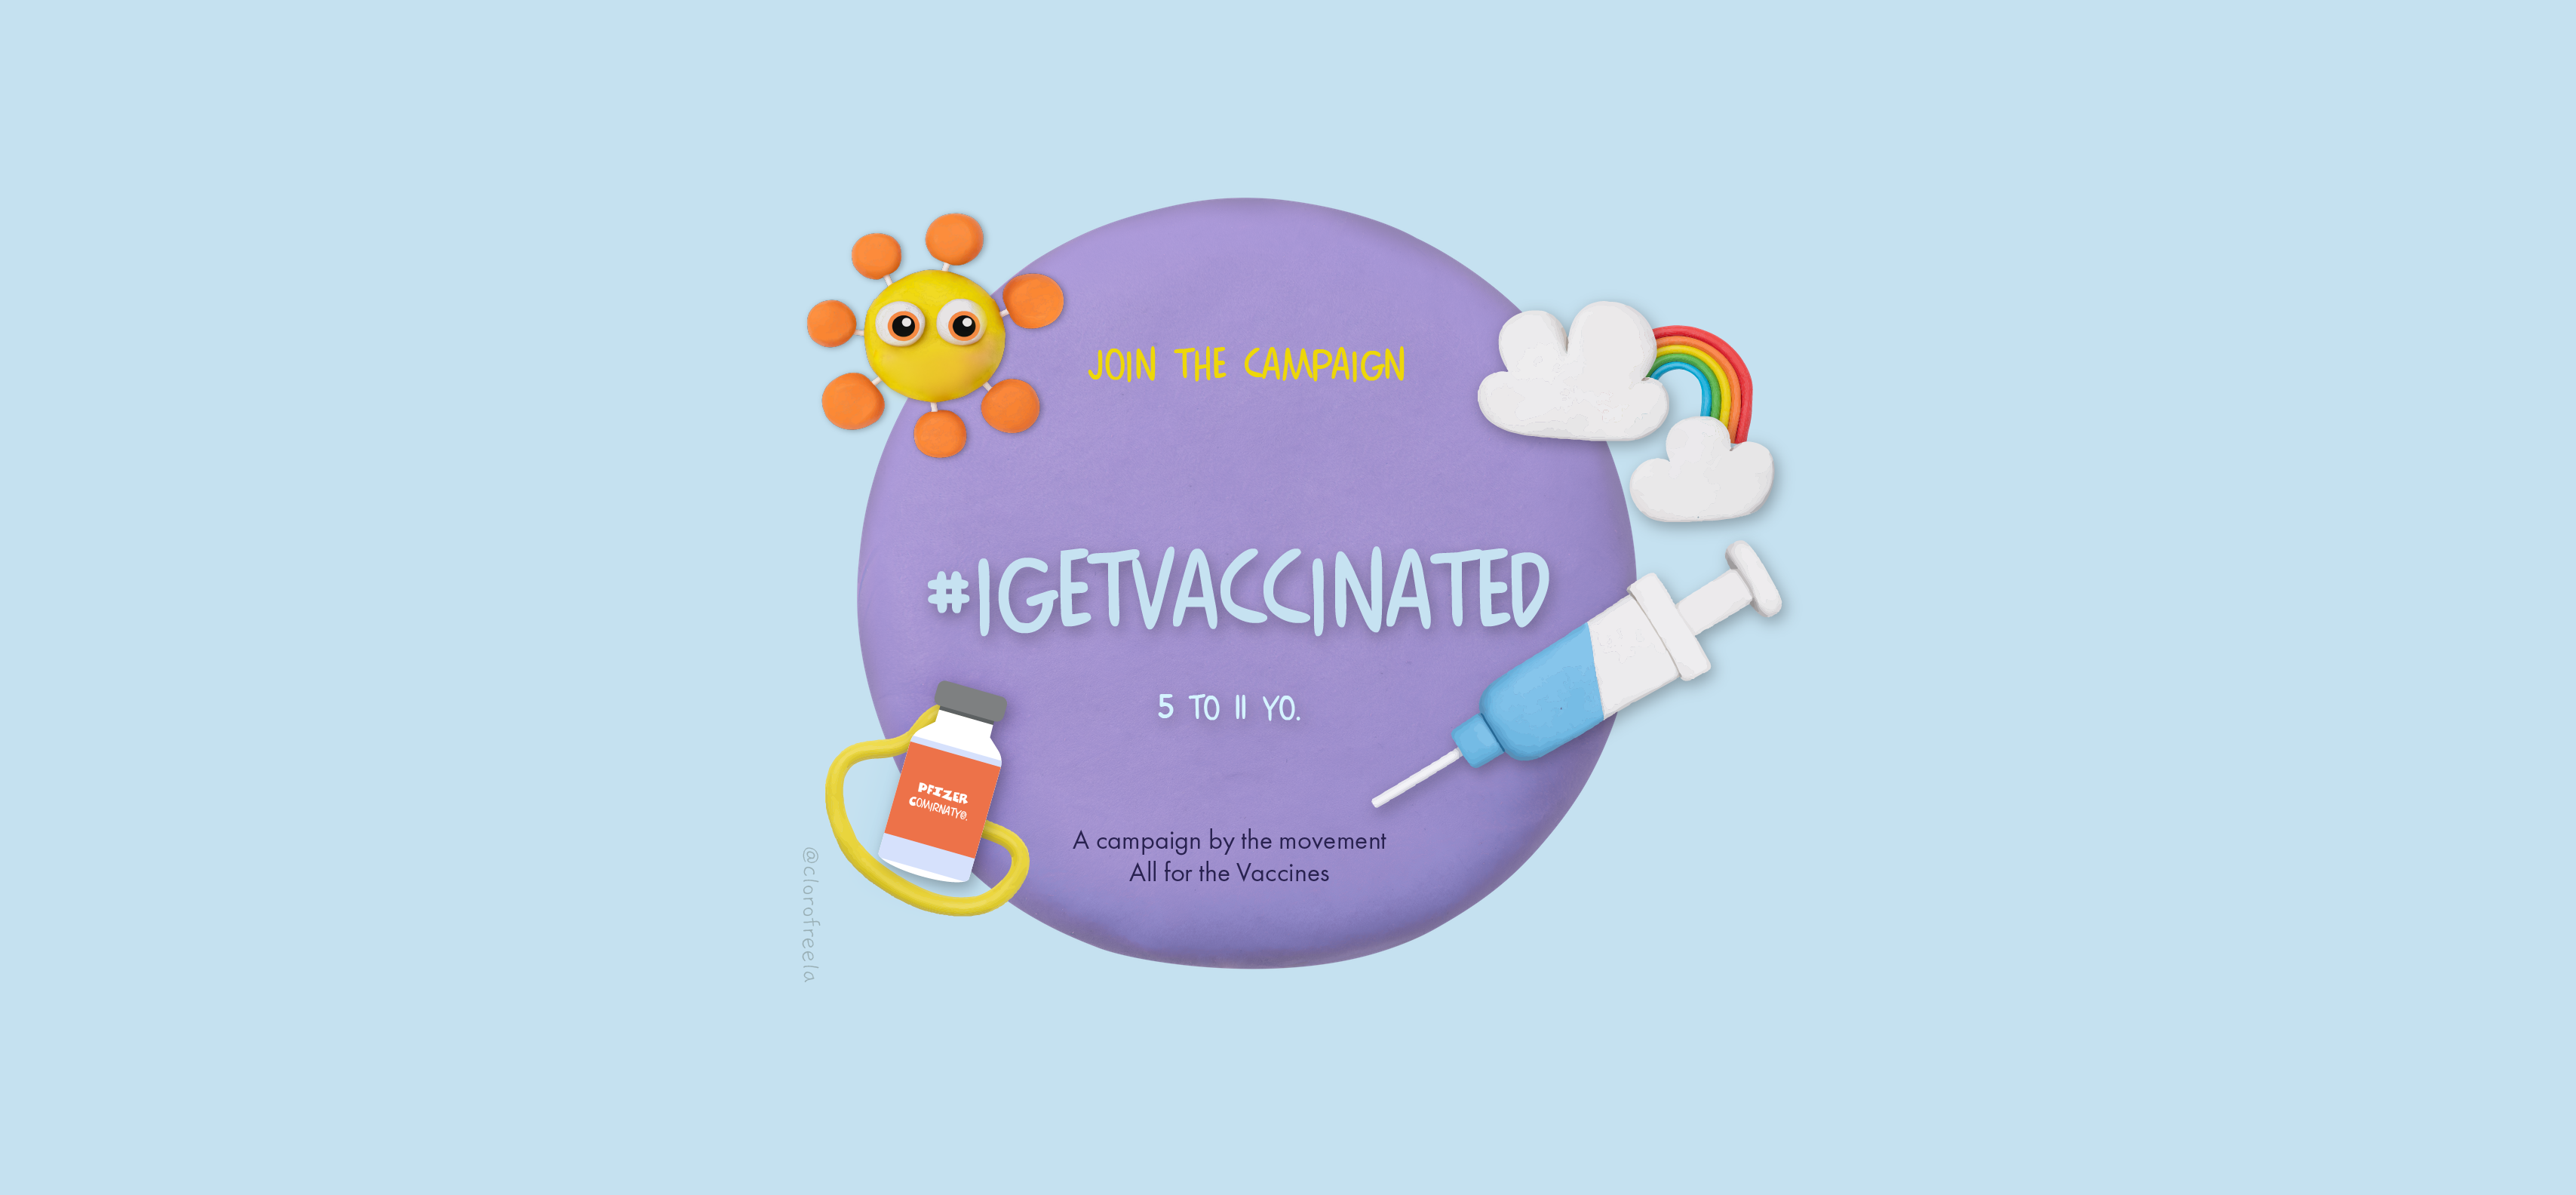 Join the campaign #Igetvaccinated